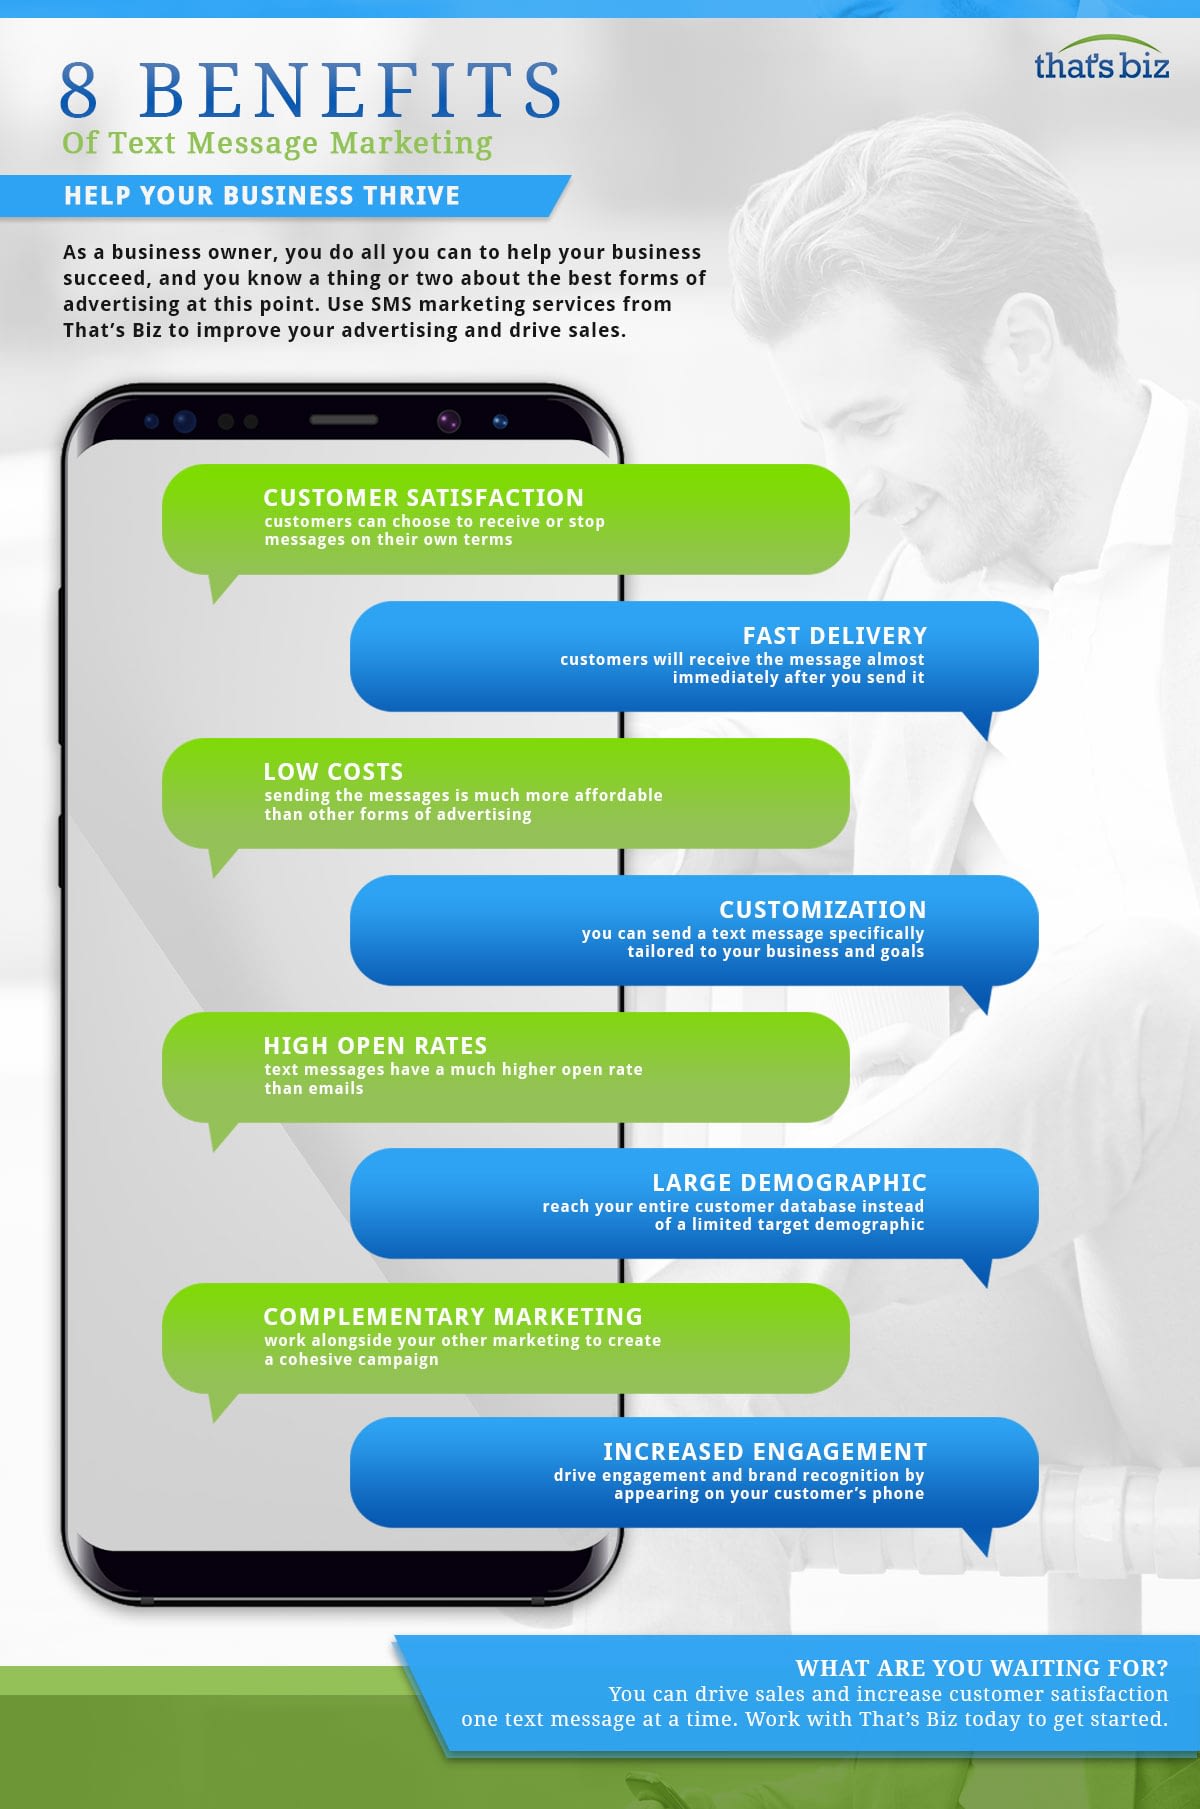 Text Message Marketing: 8 Benefits Of Marketing With Text Messages